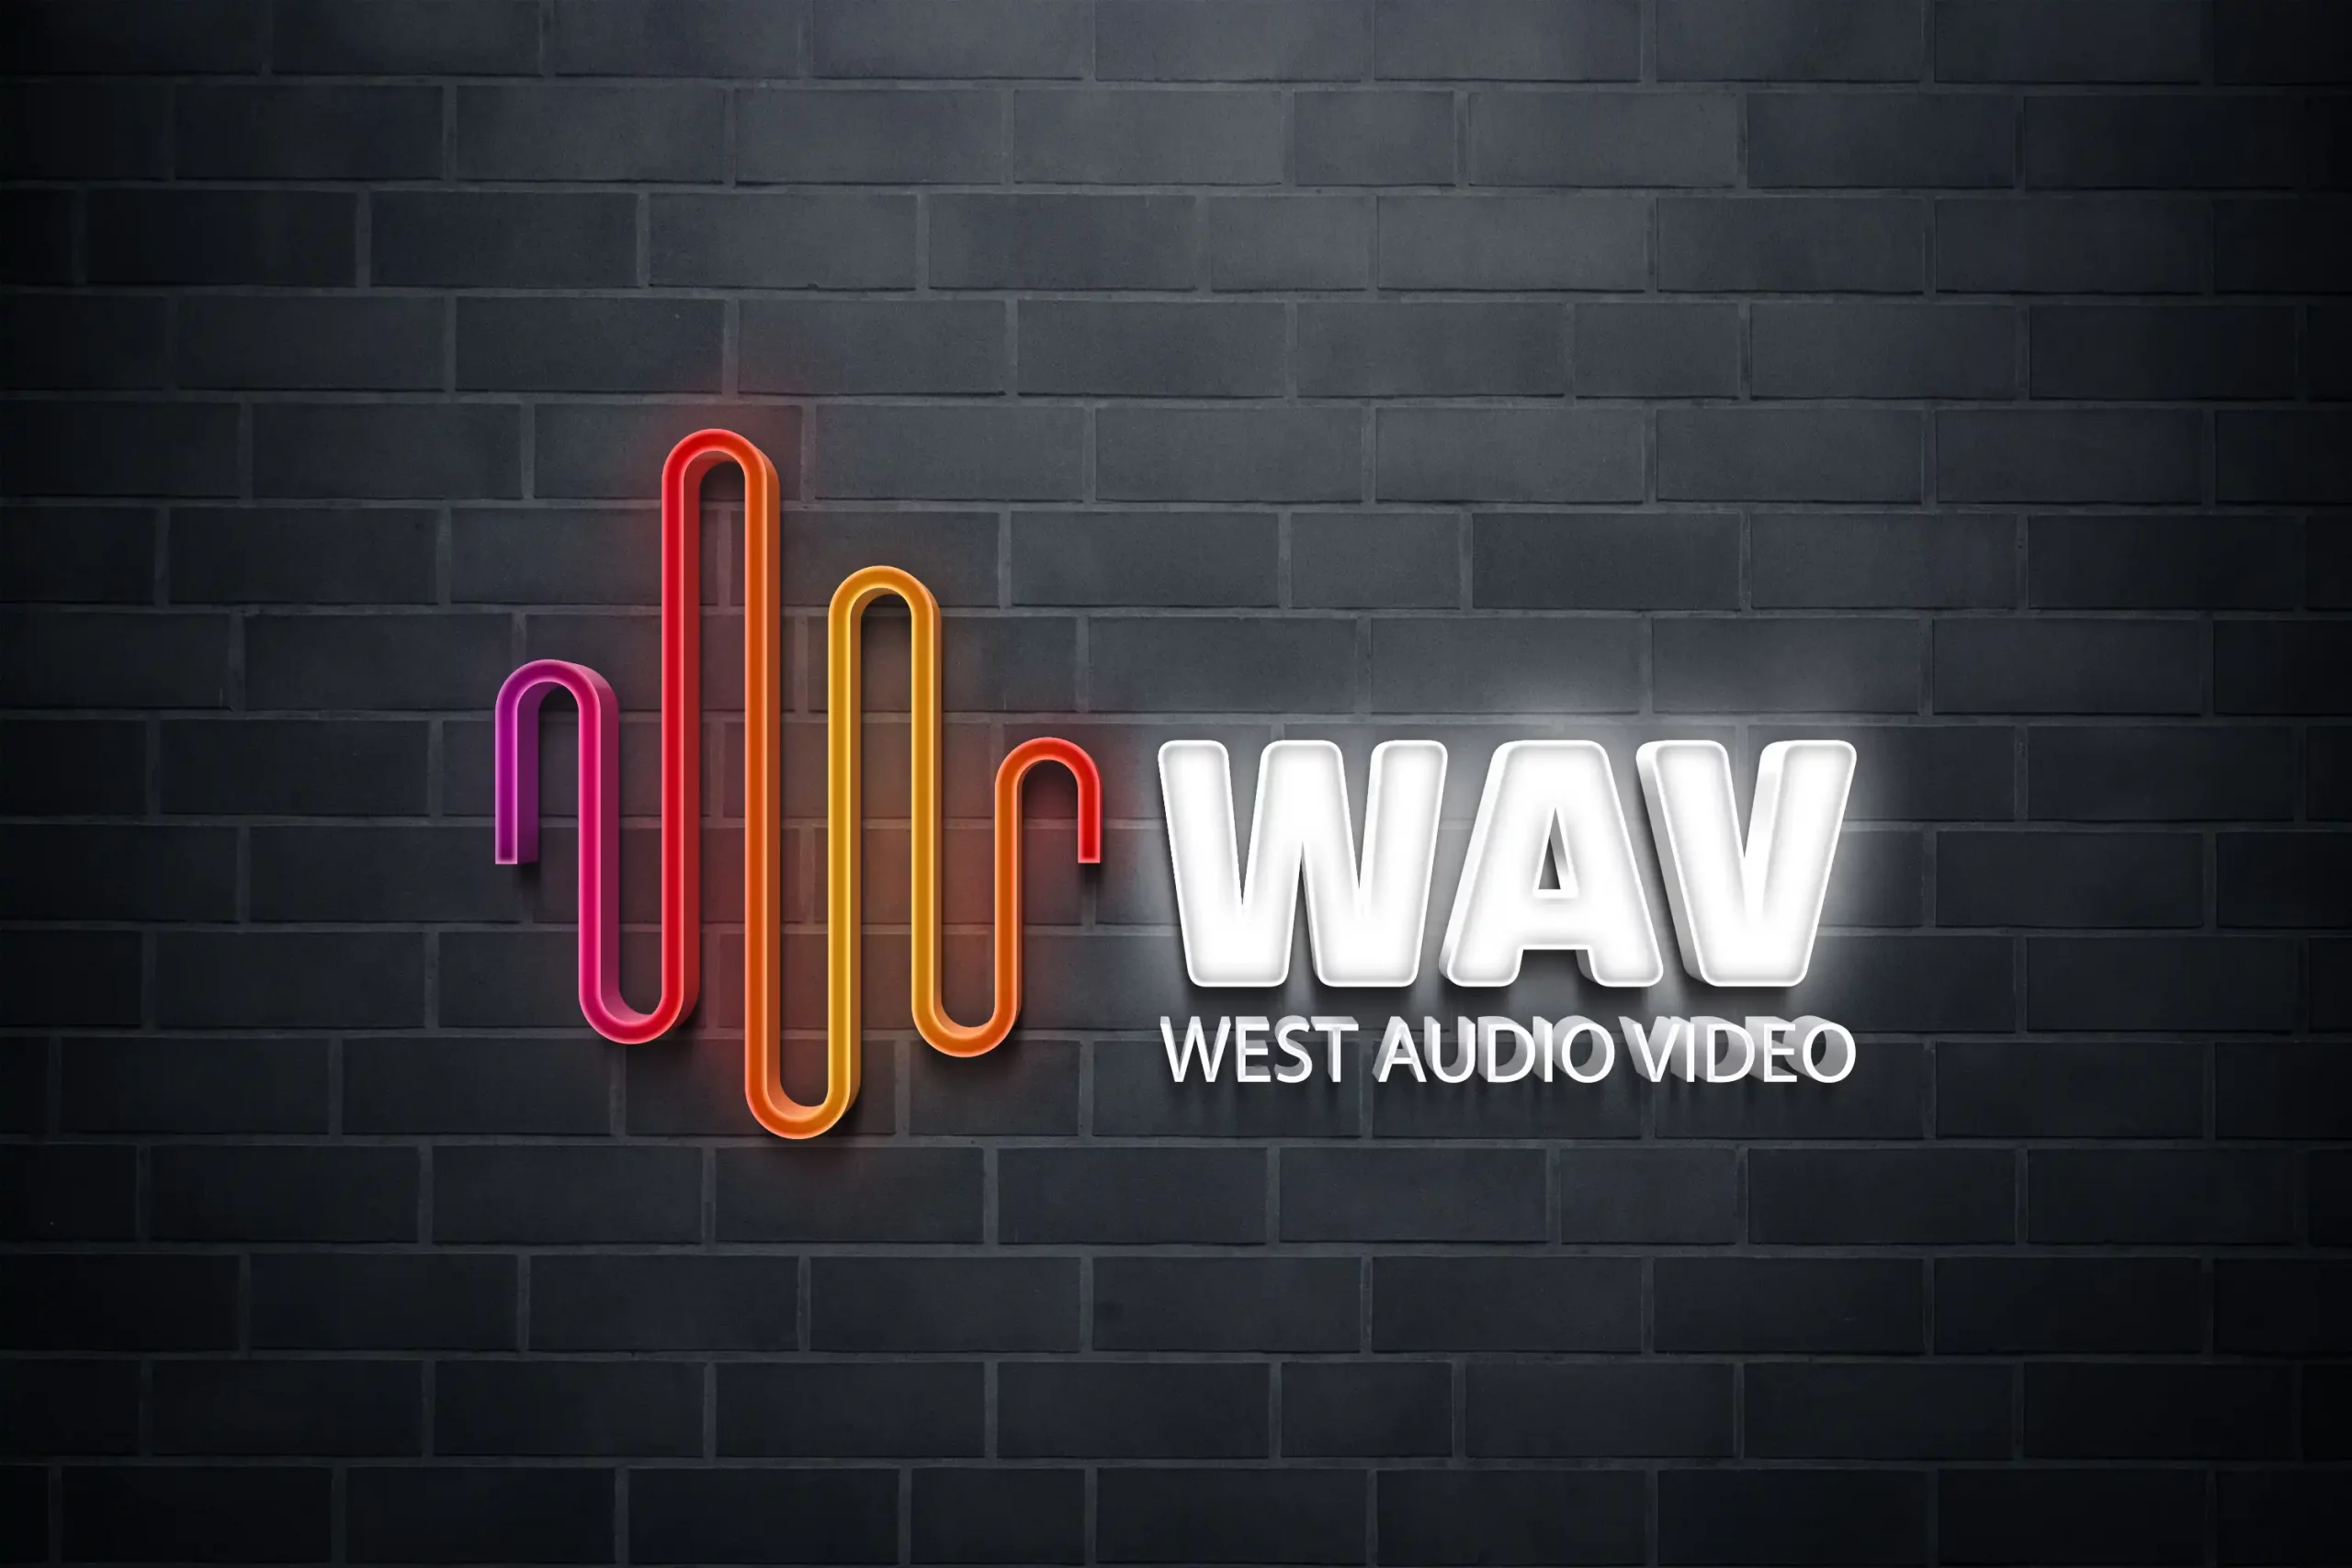 Logo Making made easy for West Audio Video (WAV) in West Melton, Selwyn, Christchucrh, Canterbury, NZ. A business friendly creative radio station styled Logo Design made by XDC.NZ, the super experienced, Logo Designer based in Rolleston